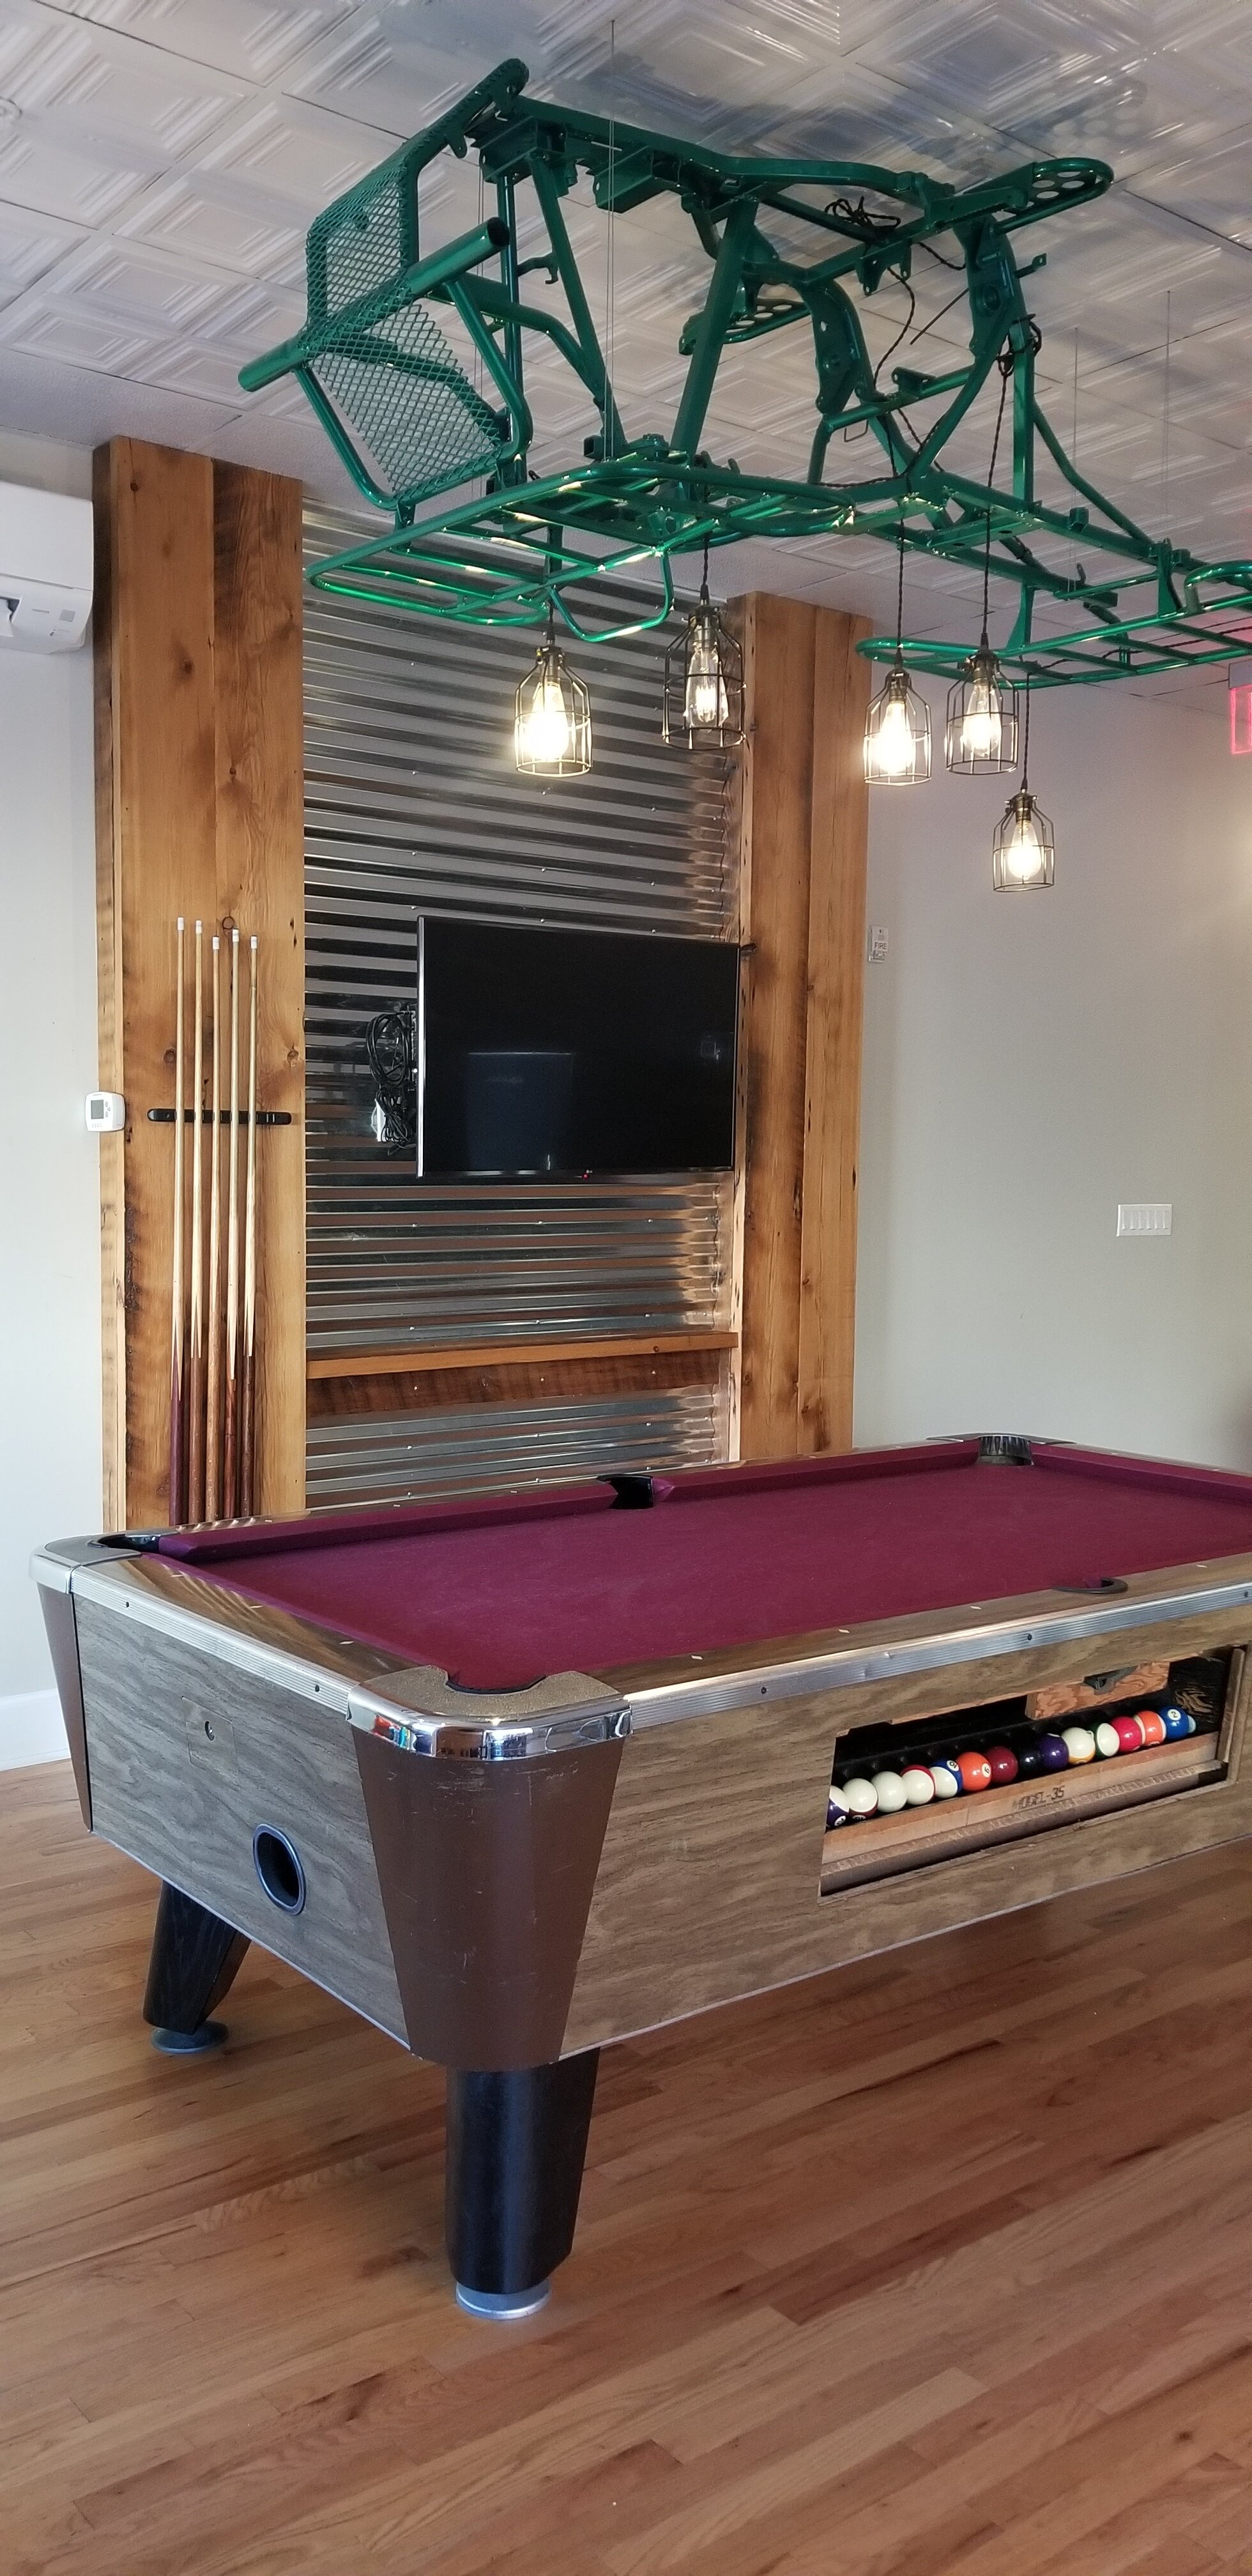 Pool table at Western Front Hotel St Paul Virginia